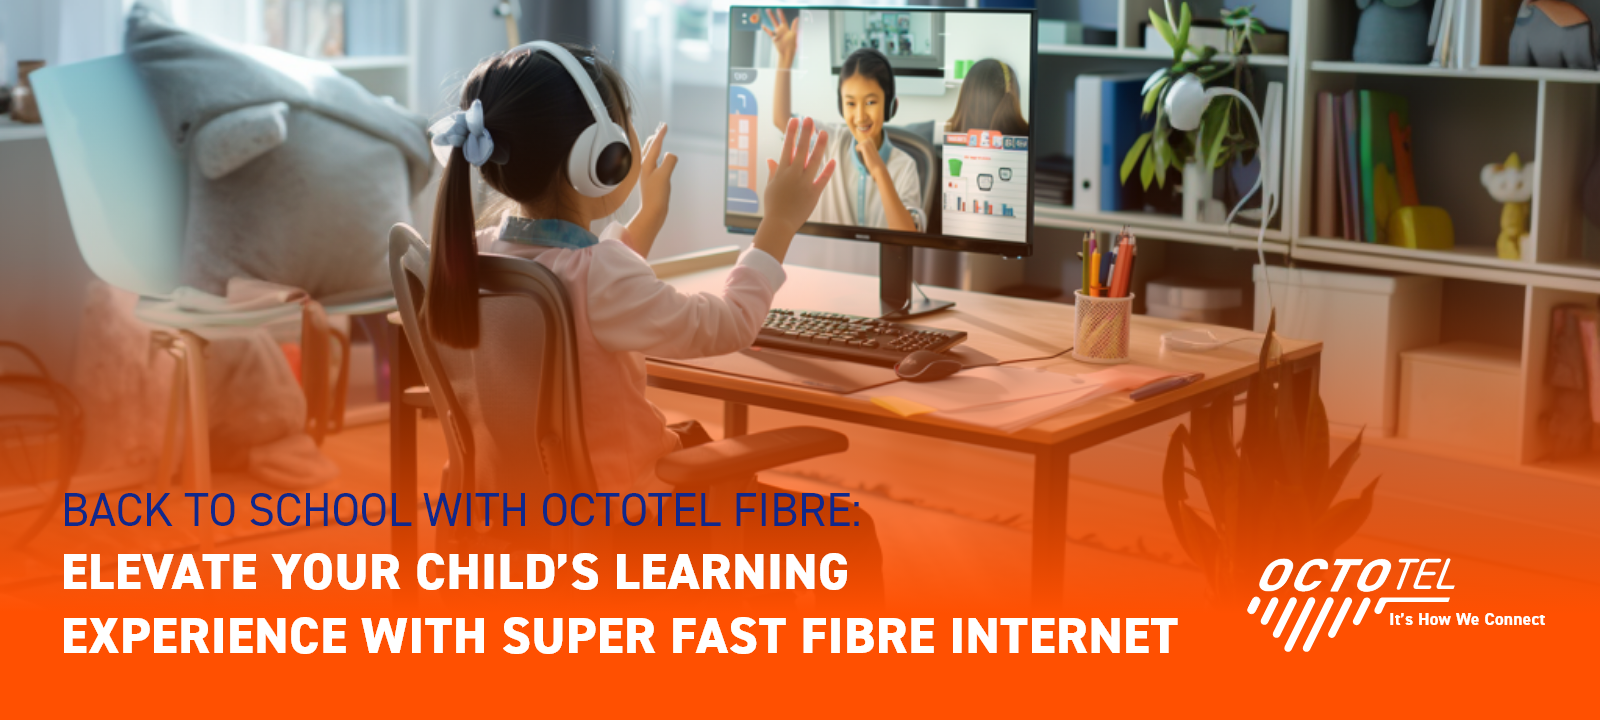 BACK TO SCHOOL WITH OCTOTEL FIBRE: ELEVATE YOUR CHILD’S LEARNING EXPERIENCE WITH SUPER FAST FIBRE INTERNET.